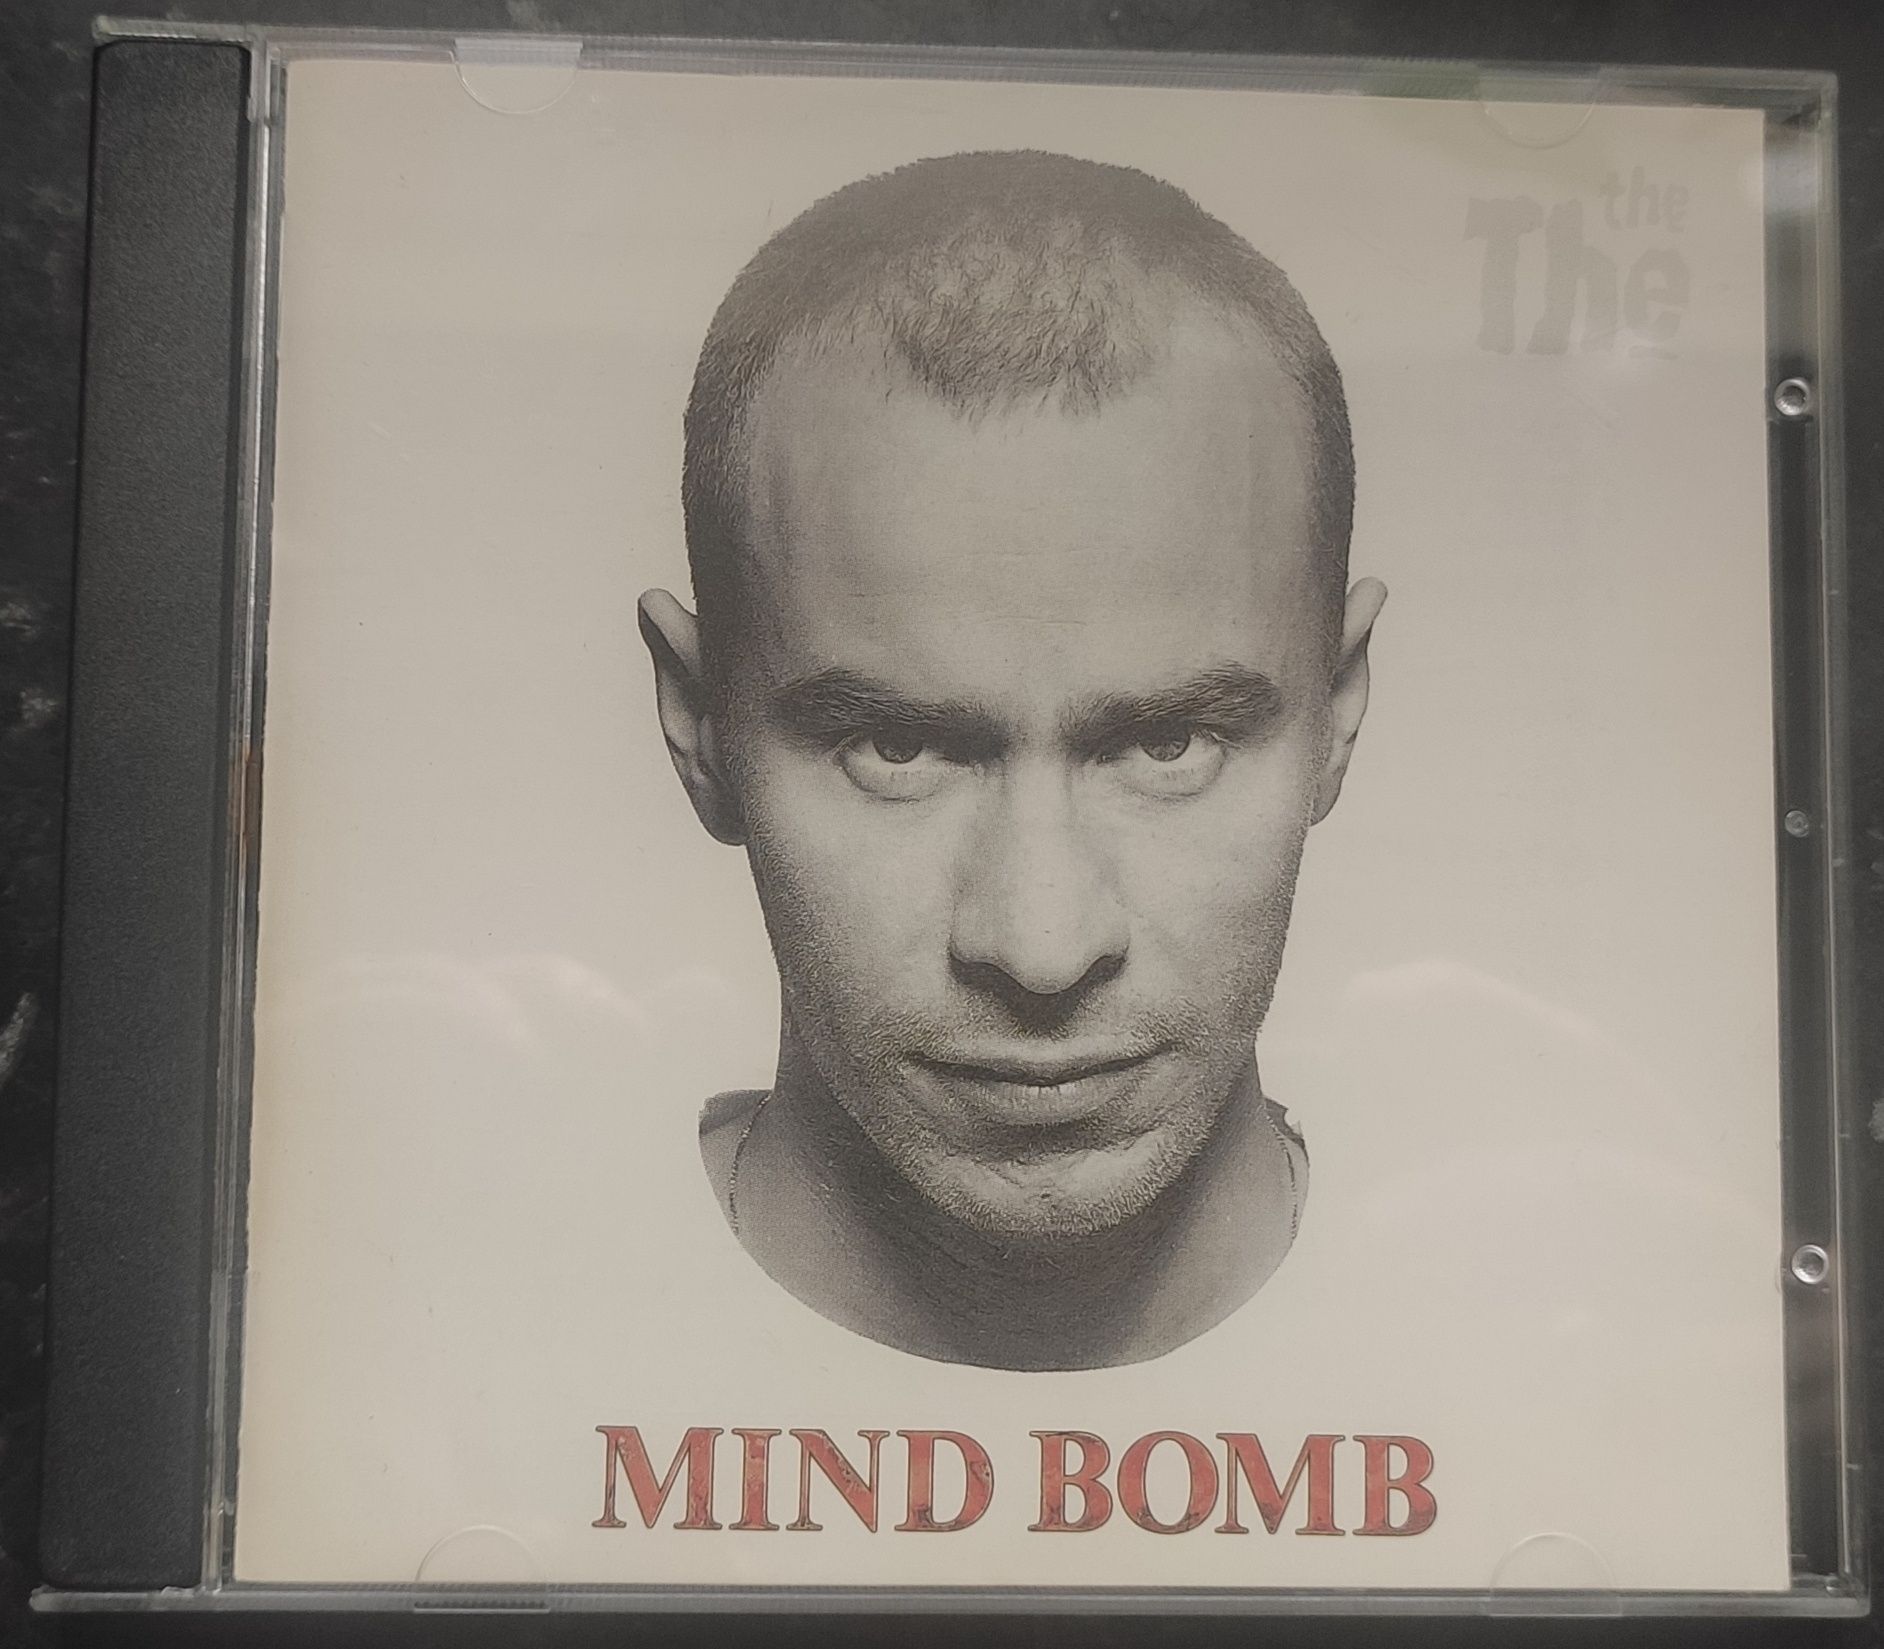 The The "Mind Bomb" cd